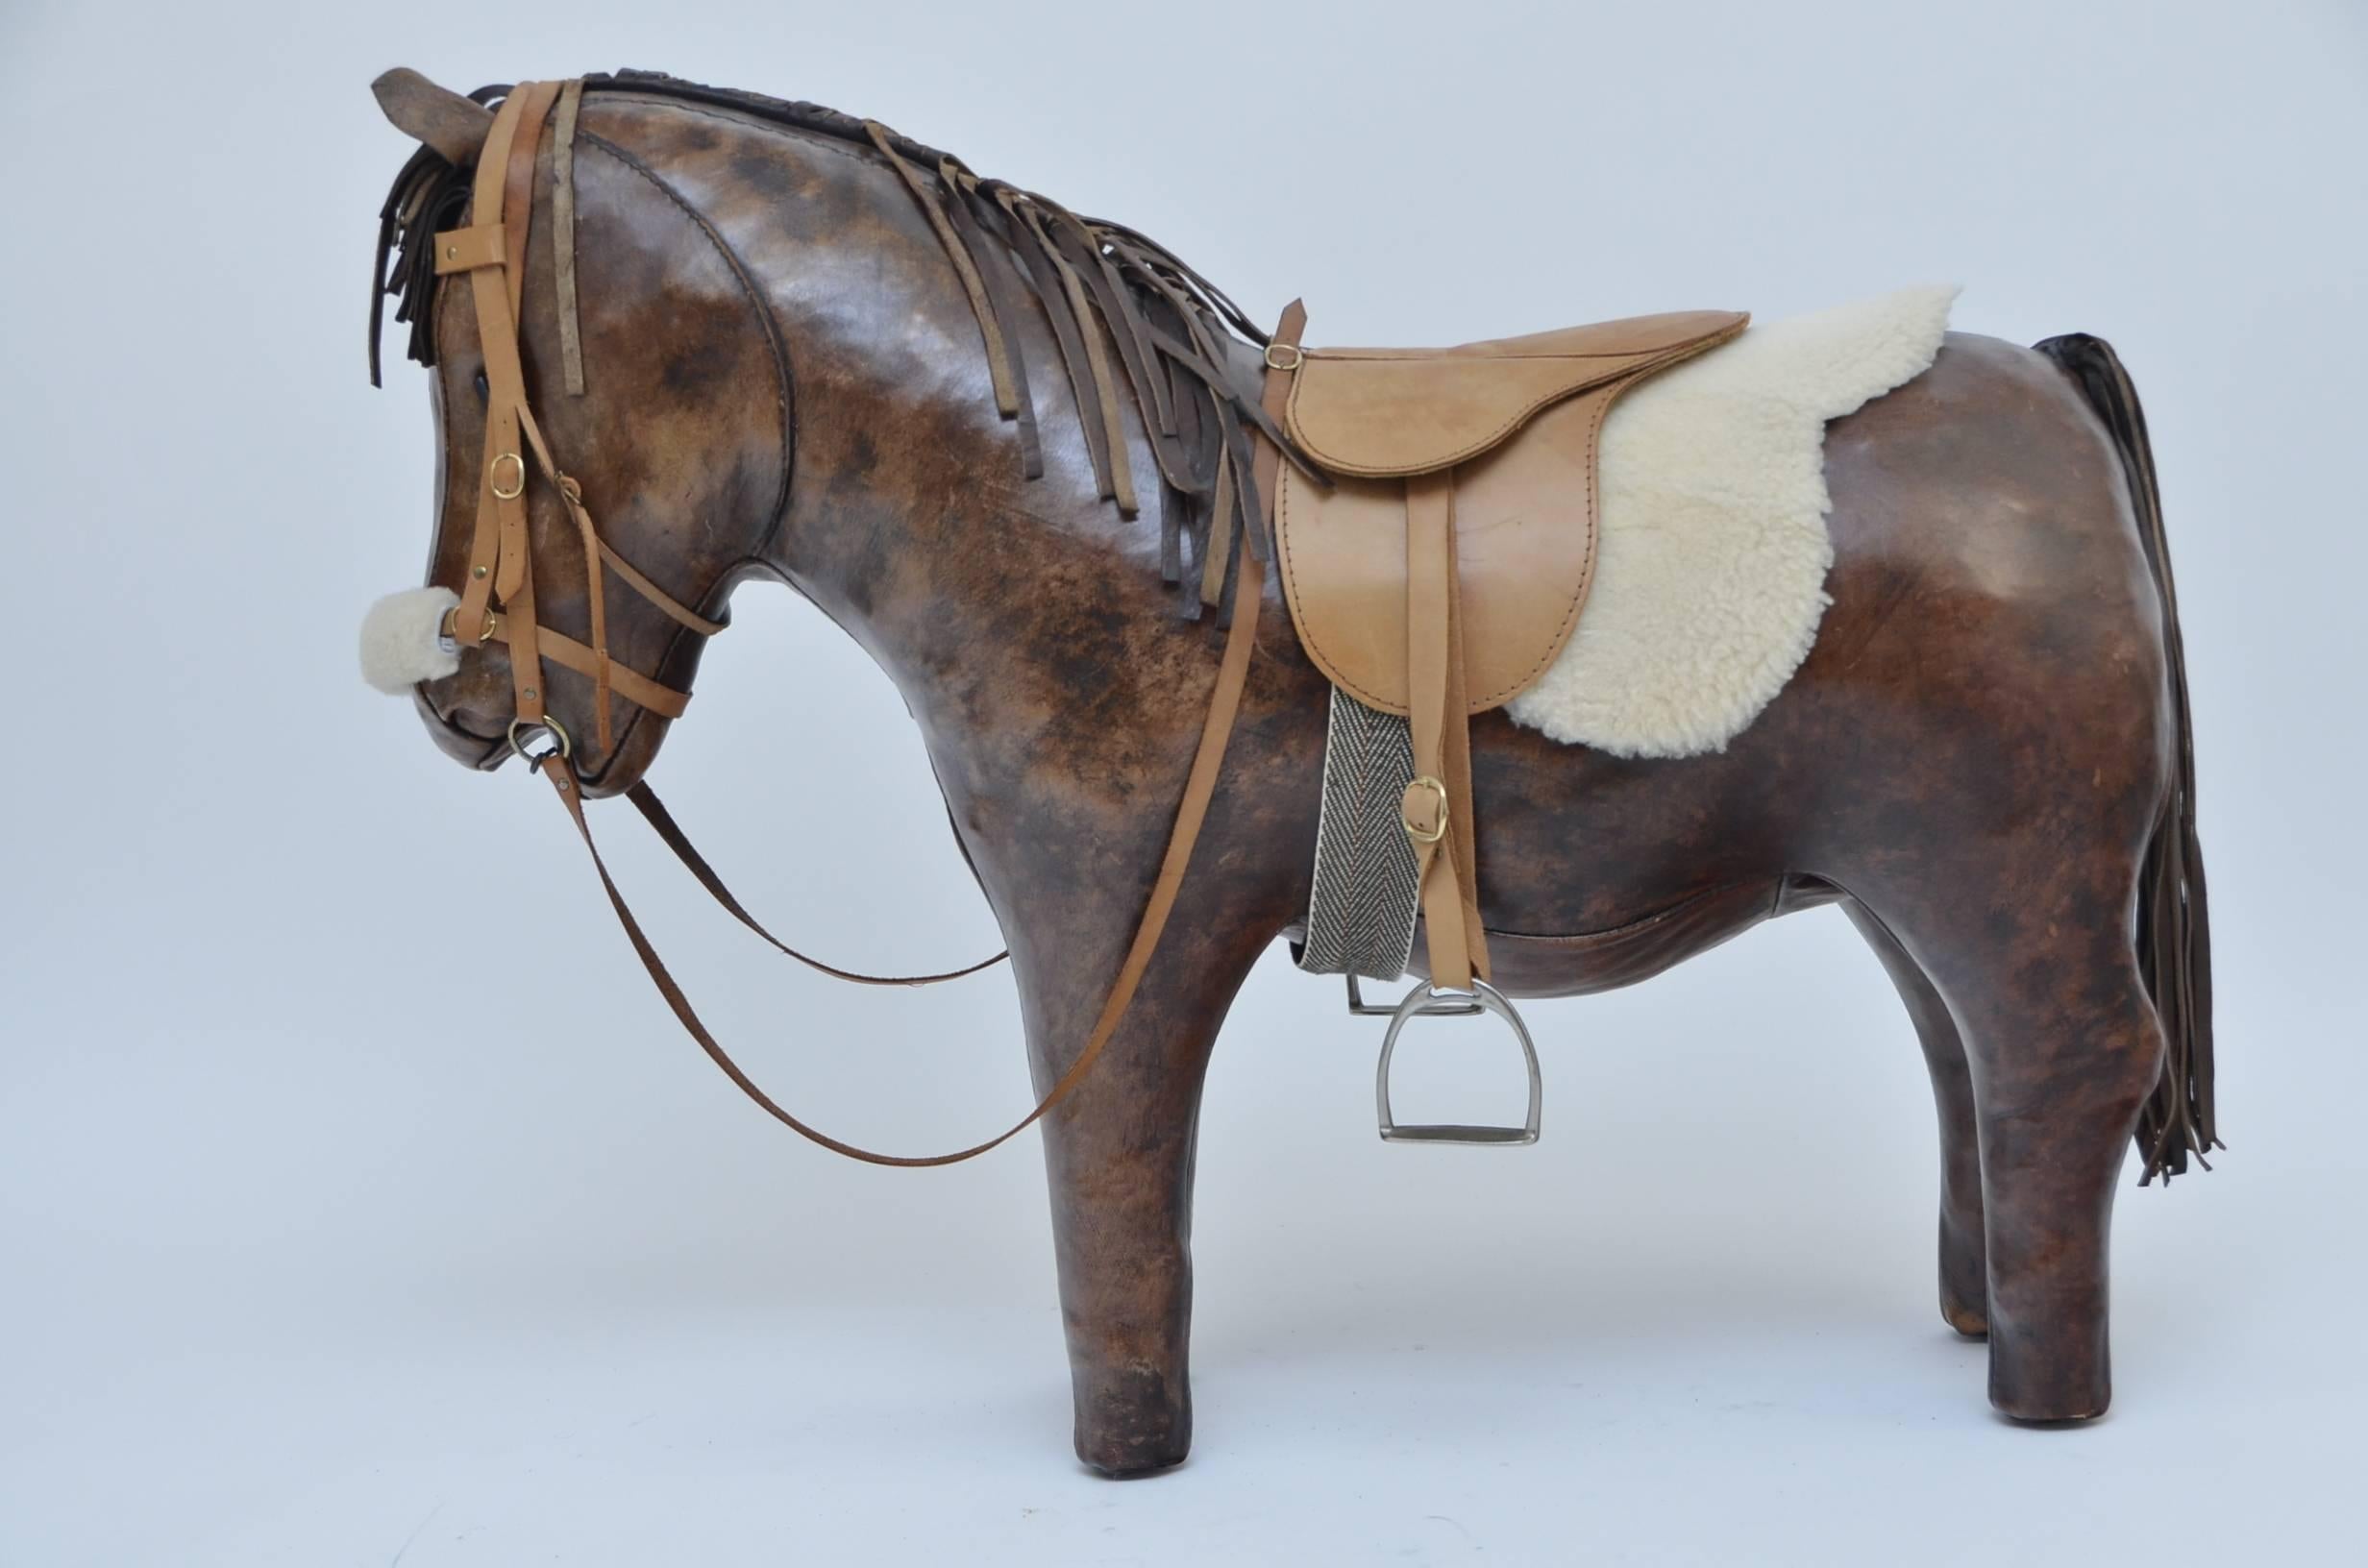 Leather Horse Toy  By Dimitri Omersa For Abercrombie & Fitch.
Excellent vintage condition.
Few marks as photographed but  this beautiful rare footstool is in amazing condition over roll.Amazing quality craftsmanship that's hard to find now